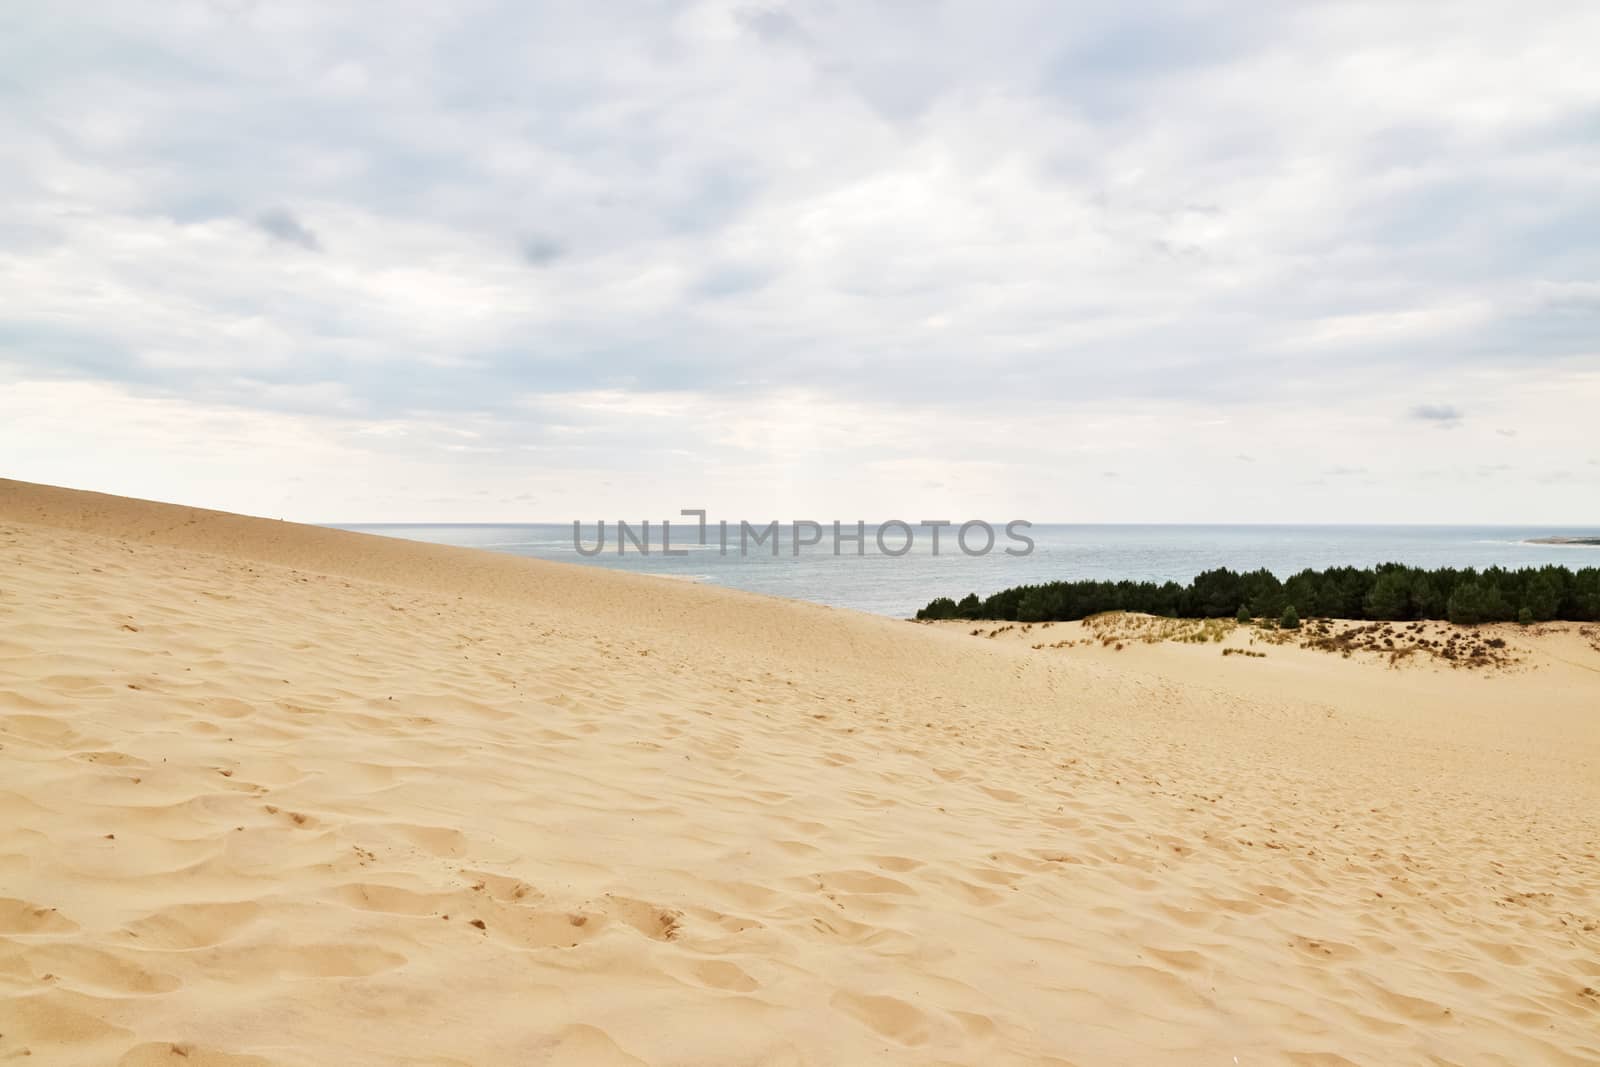 Famous Dune of Pilat. Dune du Pilat, the highest sand dune in Europe, located in the Arcachon Bay area, France.